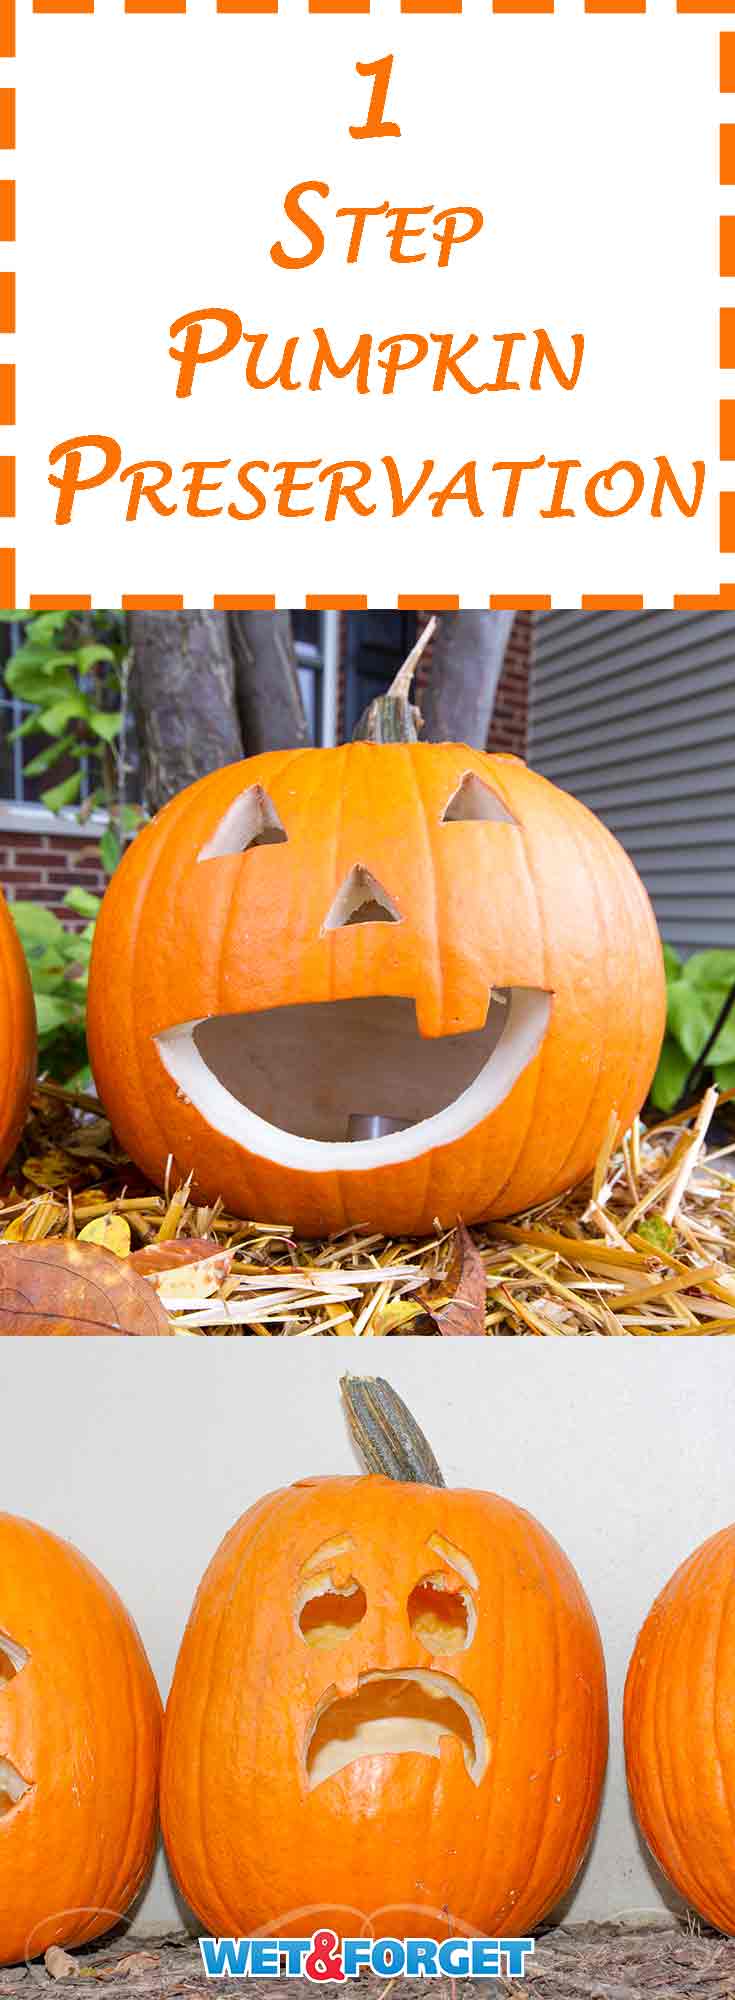 Halloween is just around the corner and it's the perfect time to start carving pumpkins. Don't let your jack-o'-lanterns fade quickly this year! Beat mold and mildew on your pumpkins with this easy 1 step method for pumpkin preservation!